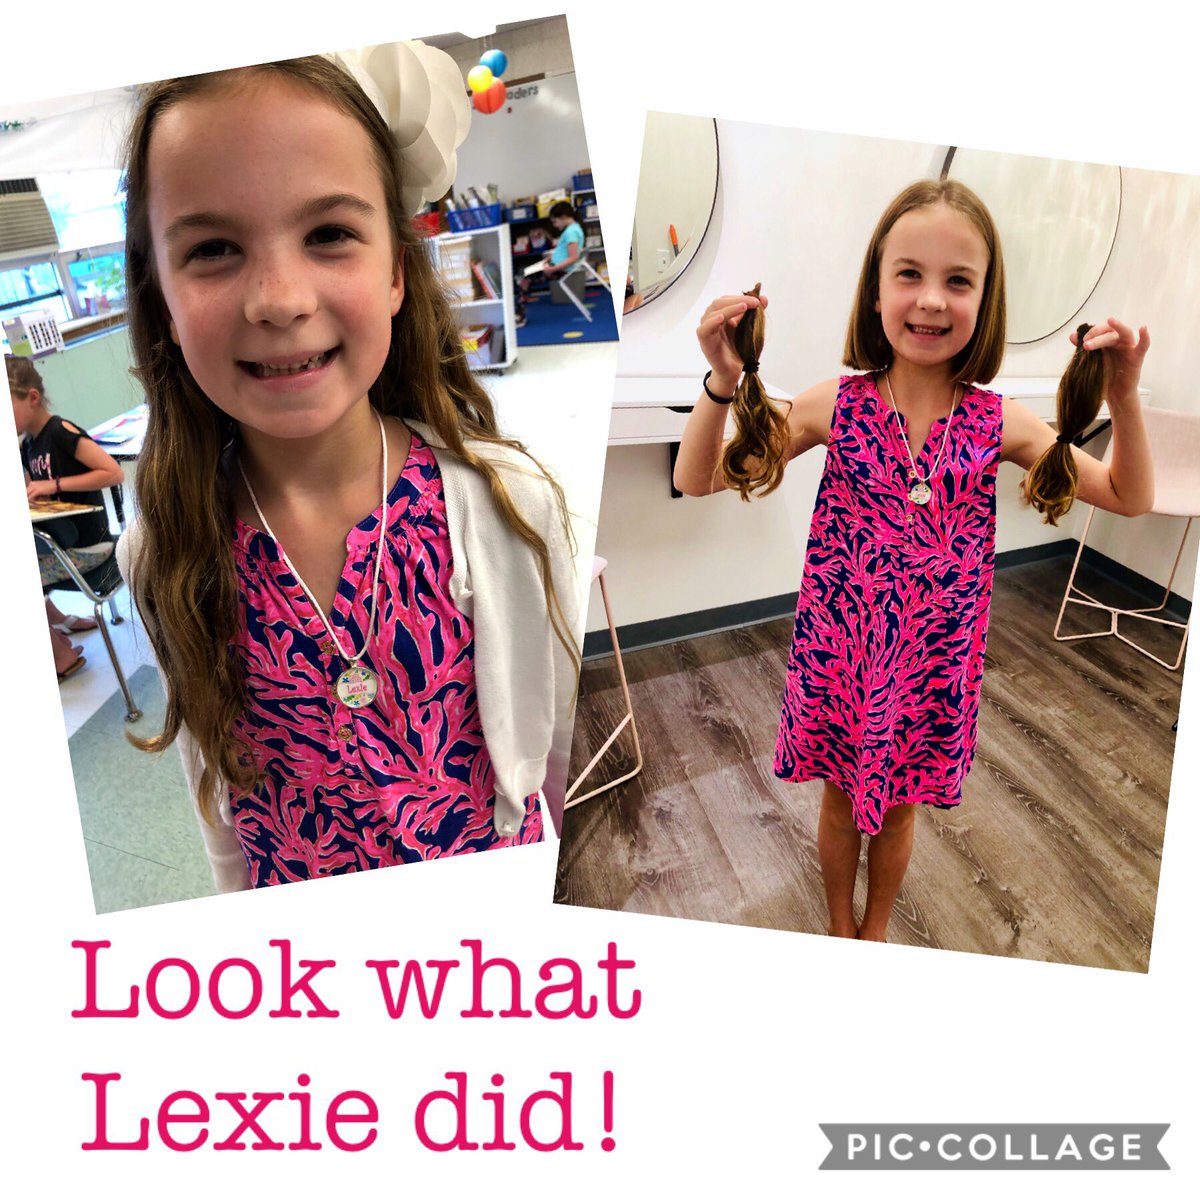 Very proud of Lexie who donated her hair to @locksoflove today! 💗#givingfeelsgood #MedfieldPS #wheelockians